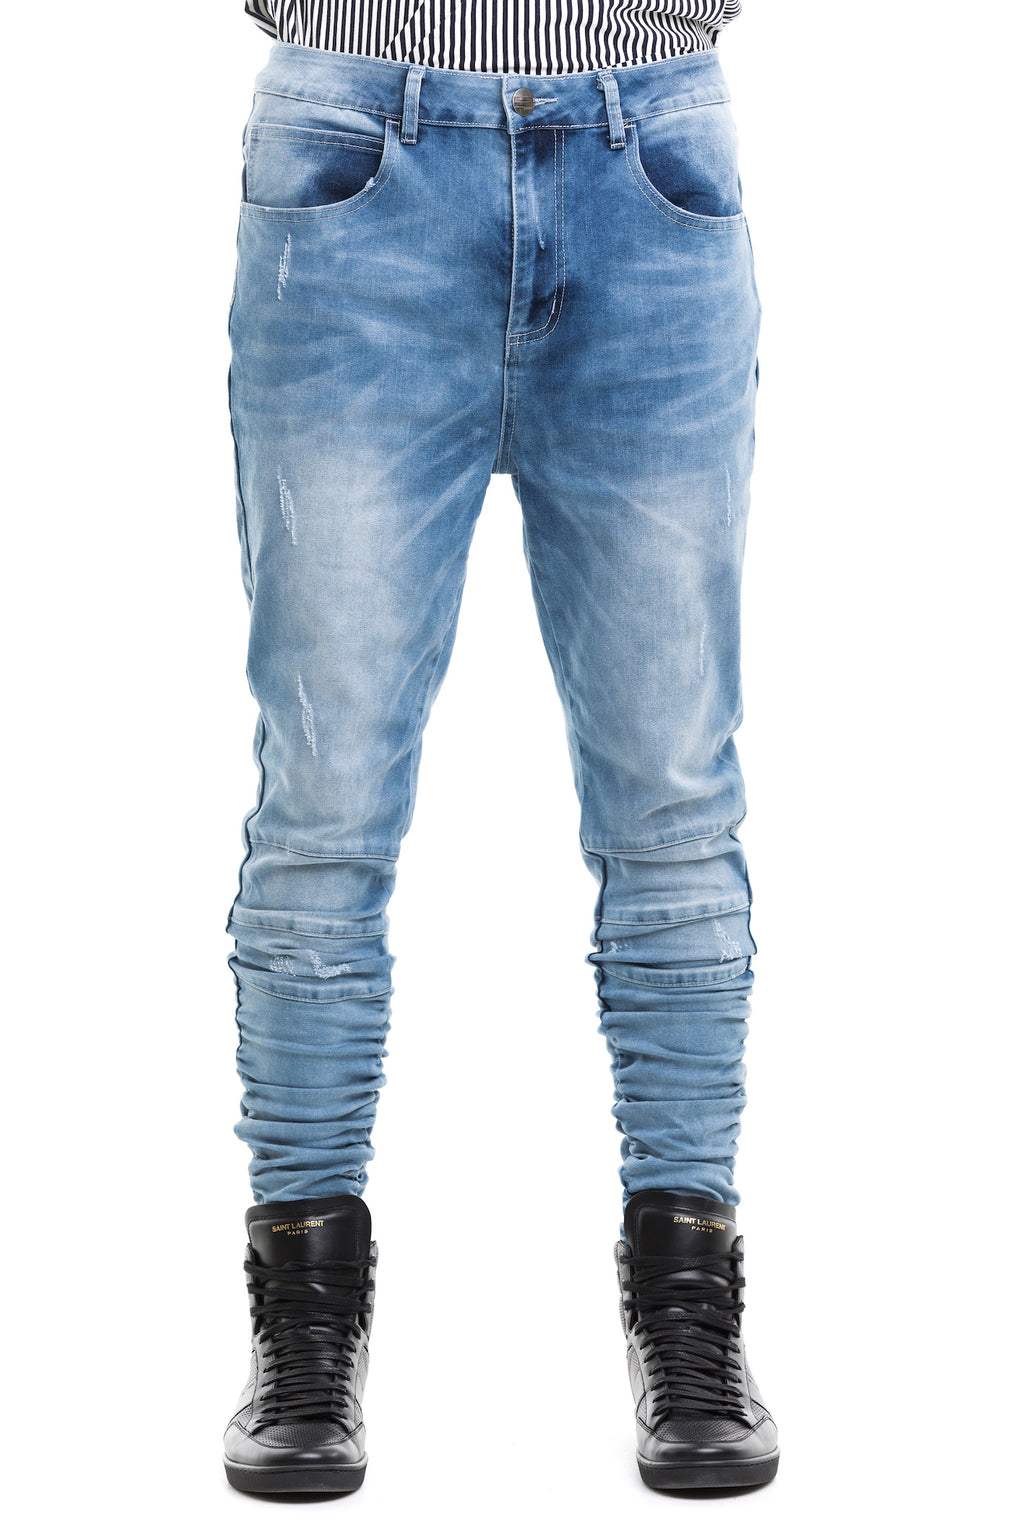 Blue  Ridge Jeans - Figured From A Mixed Cotton Blend